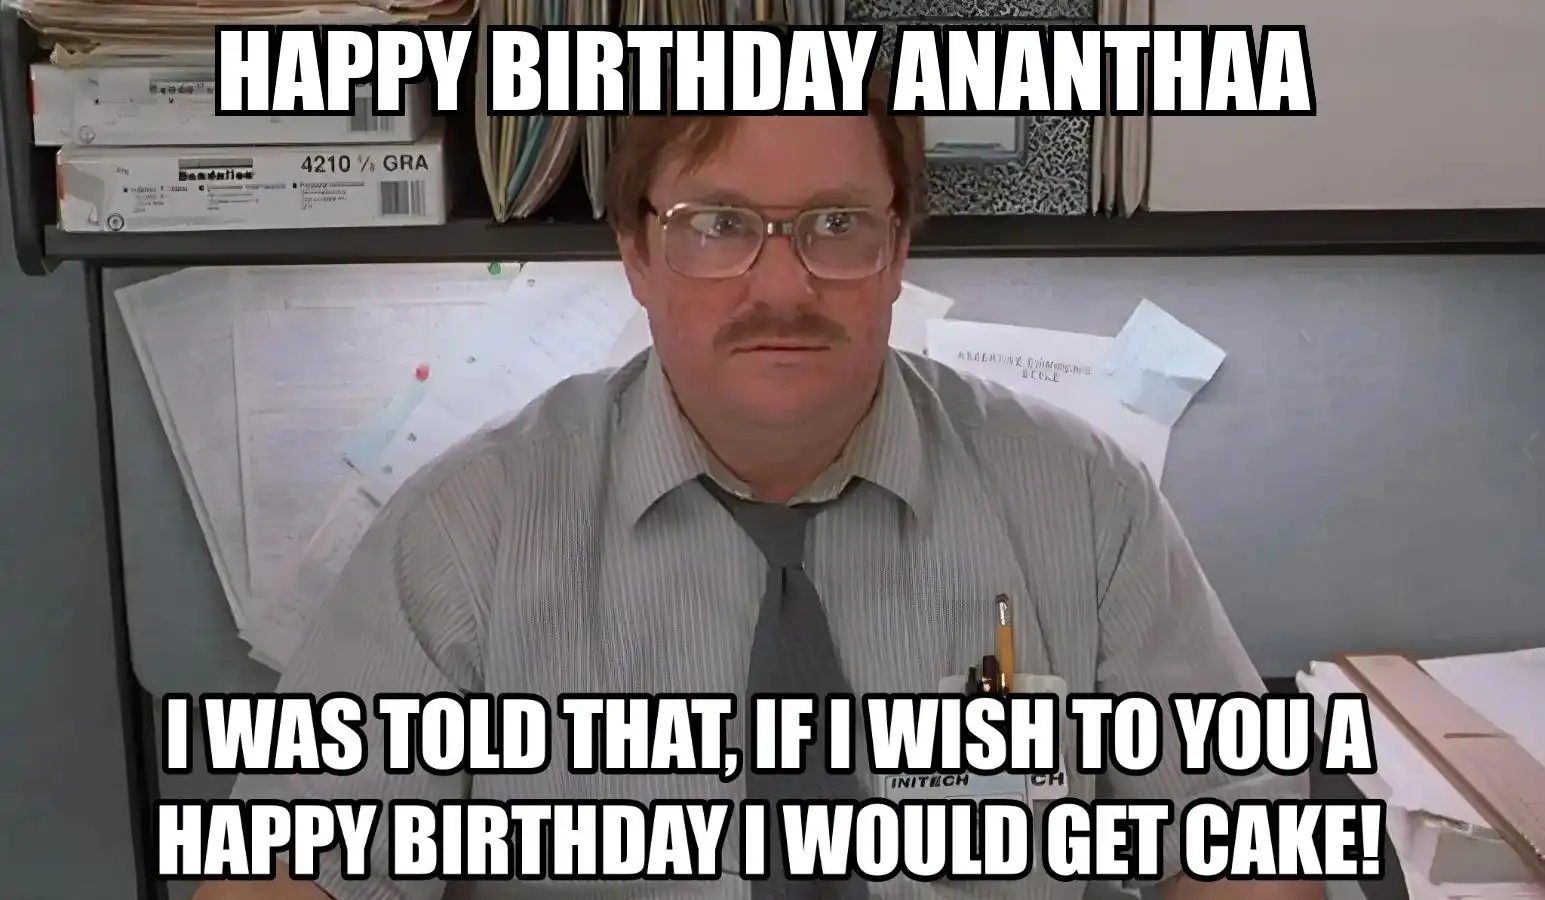 Happy Birthday Ananthaa I Would Get A Cake Meme